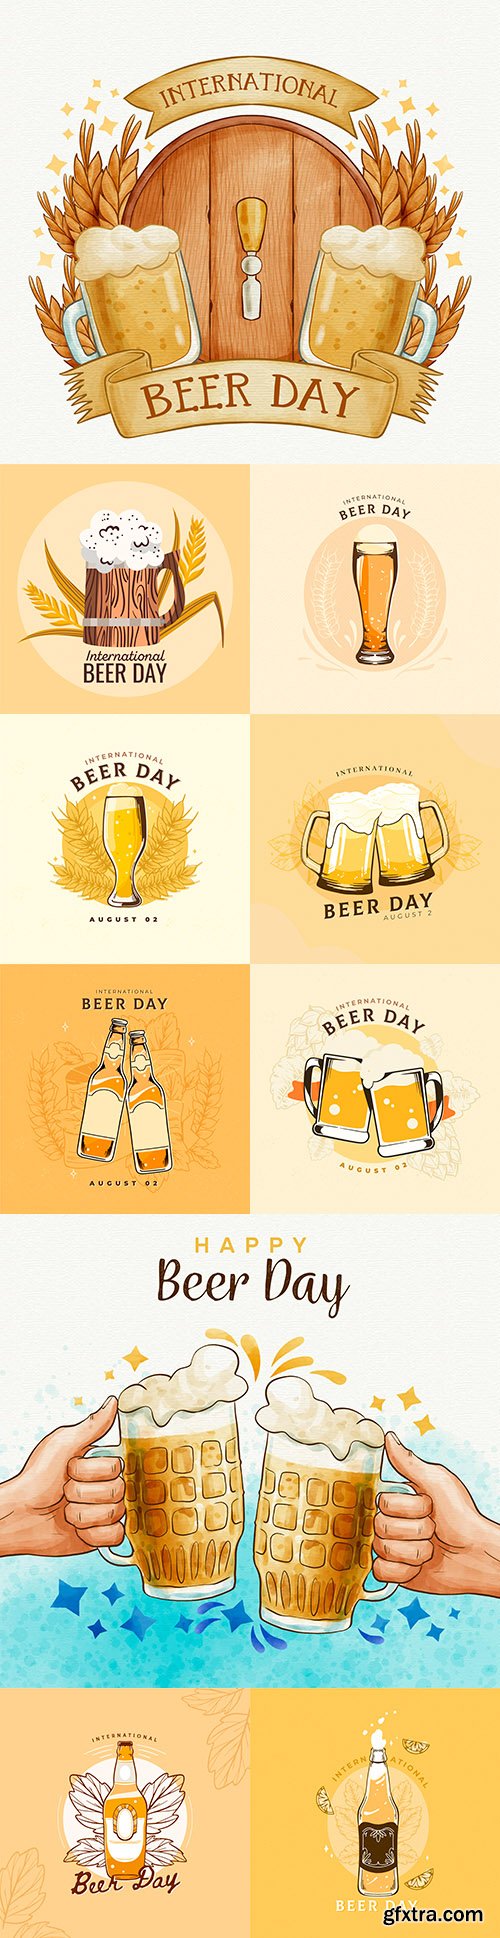 International Beer Day collection of illustrations
